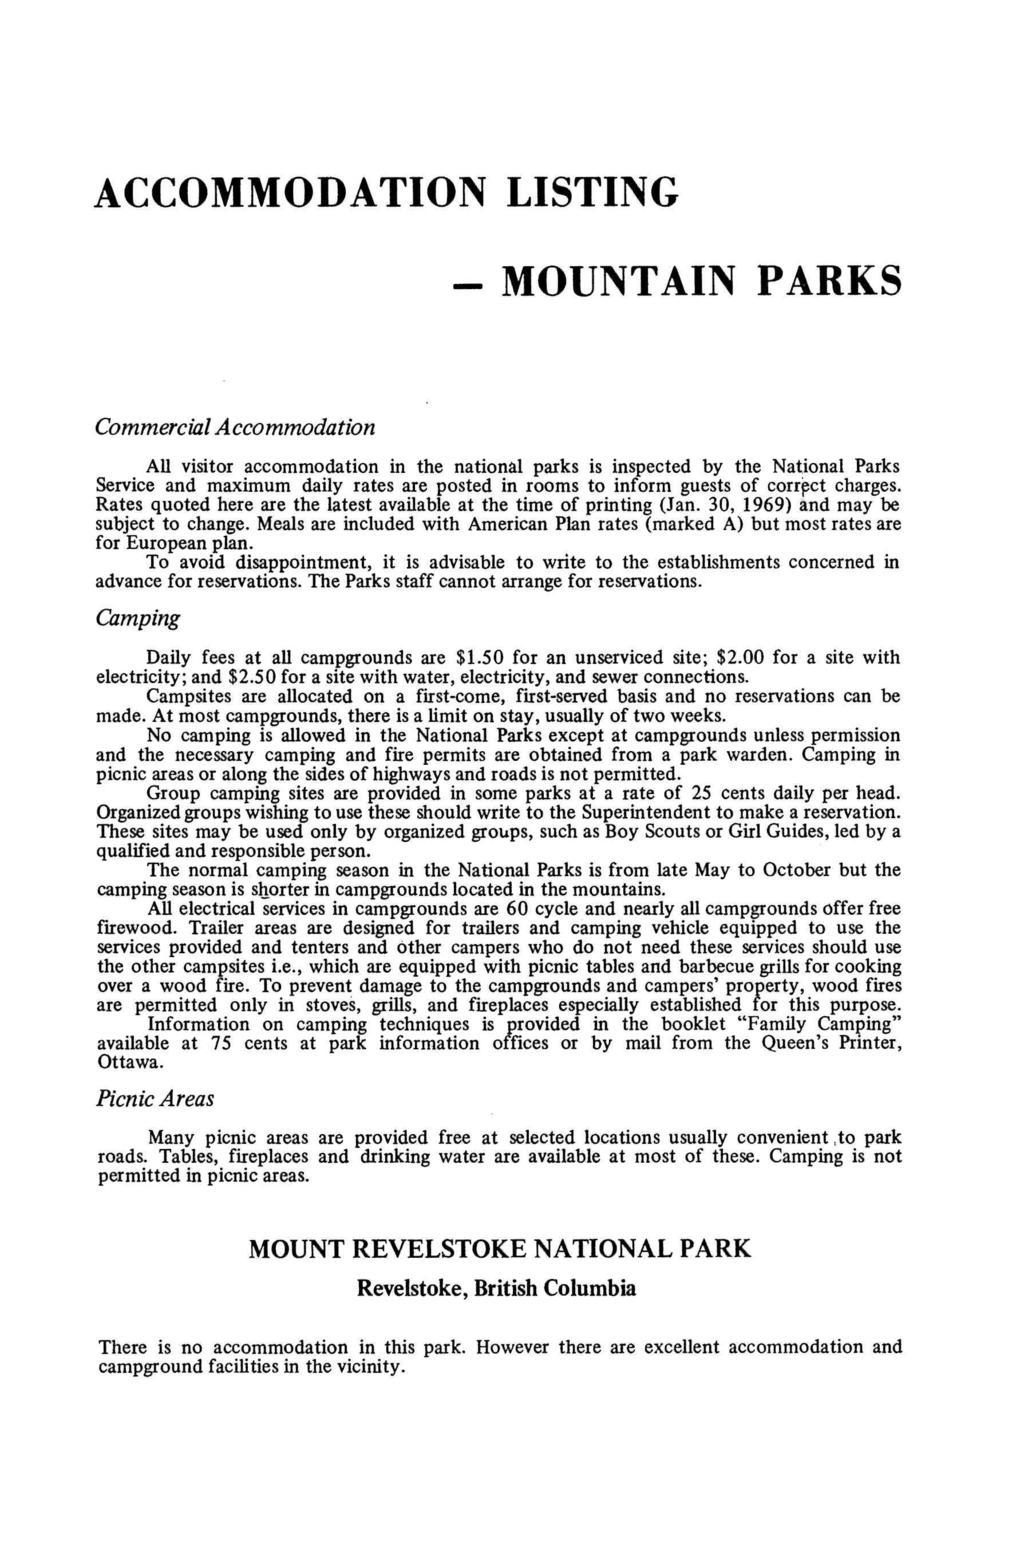 ACCOMMODATION LISTING - MOUNTAIN PARKS Commercial Accommodation All visitor accommodation in the national parks is inspected by the National Parks Service and maximum daily rates are posted in rooms